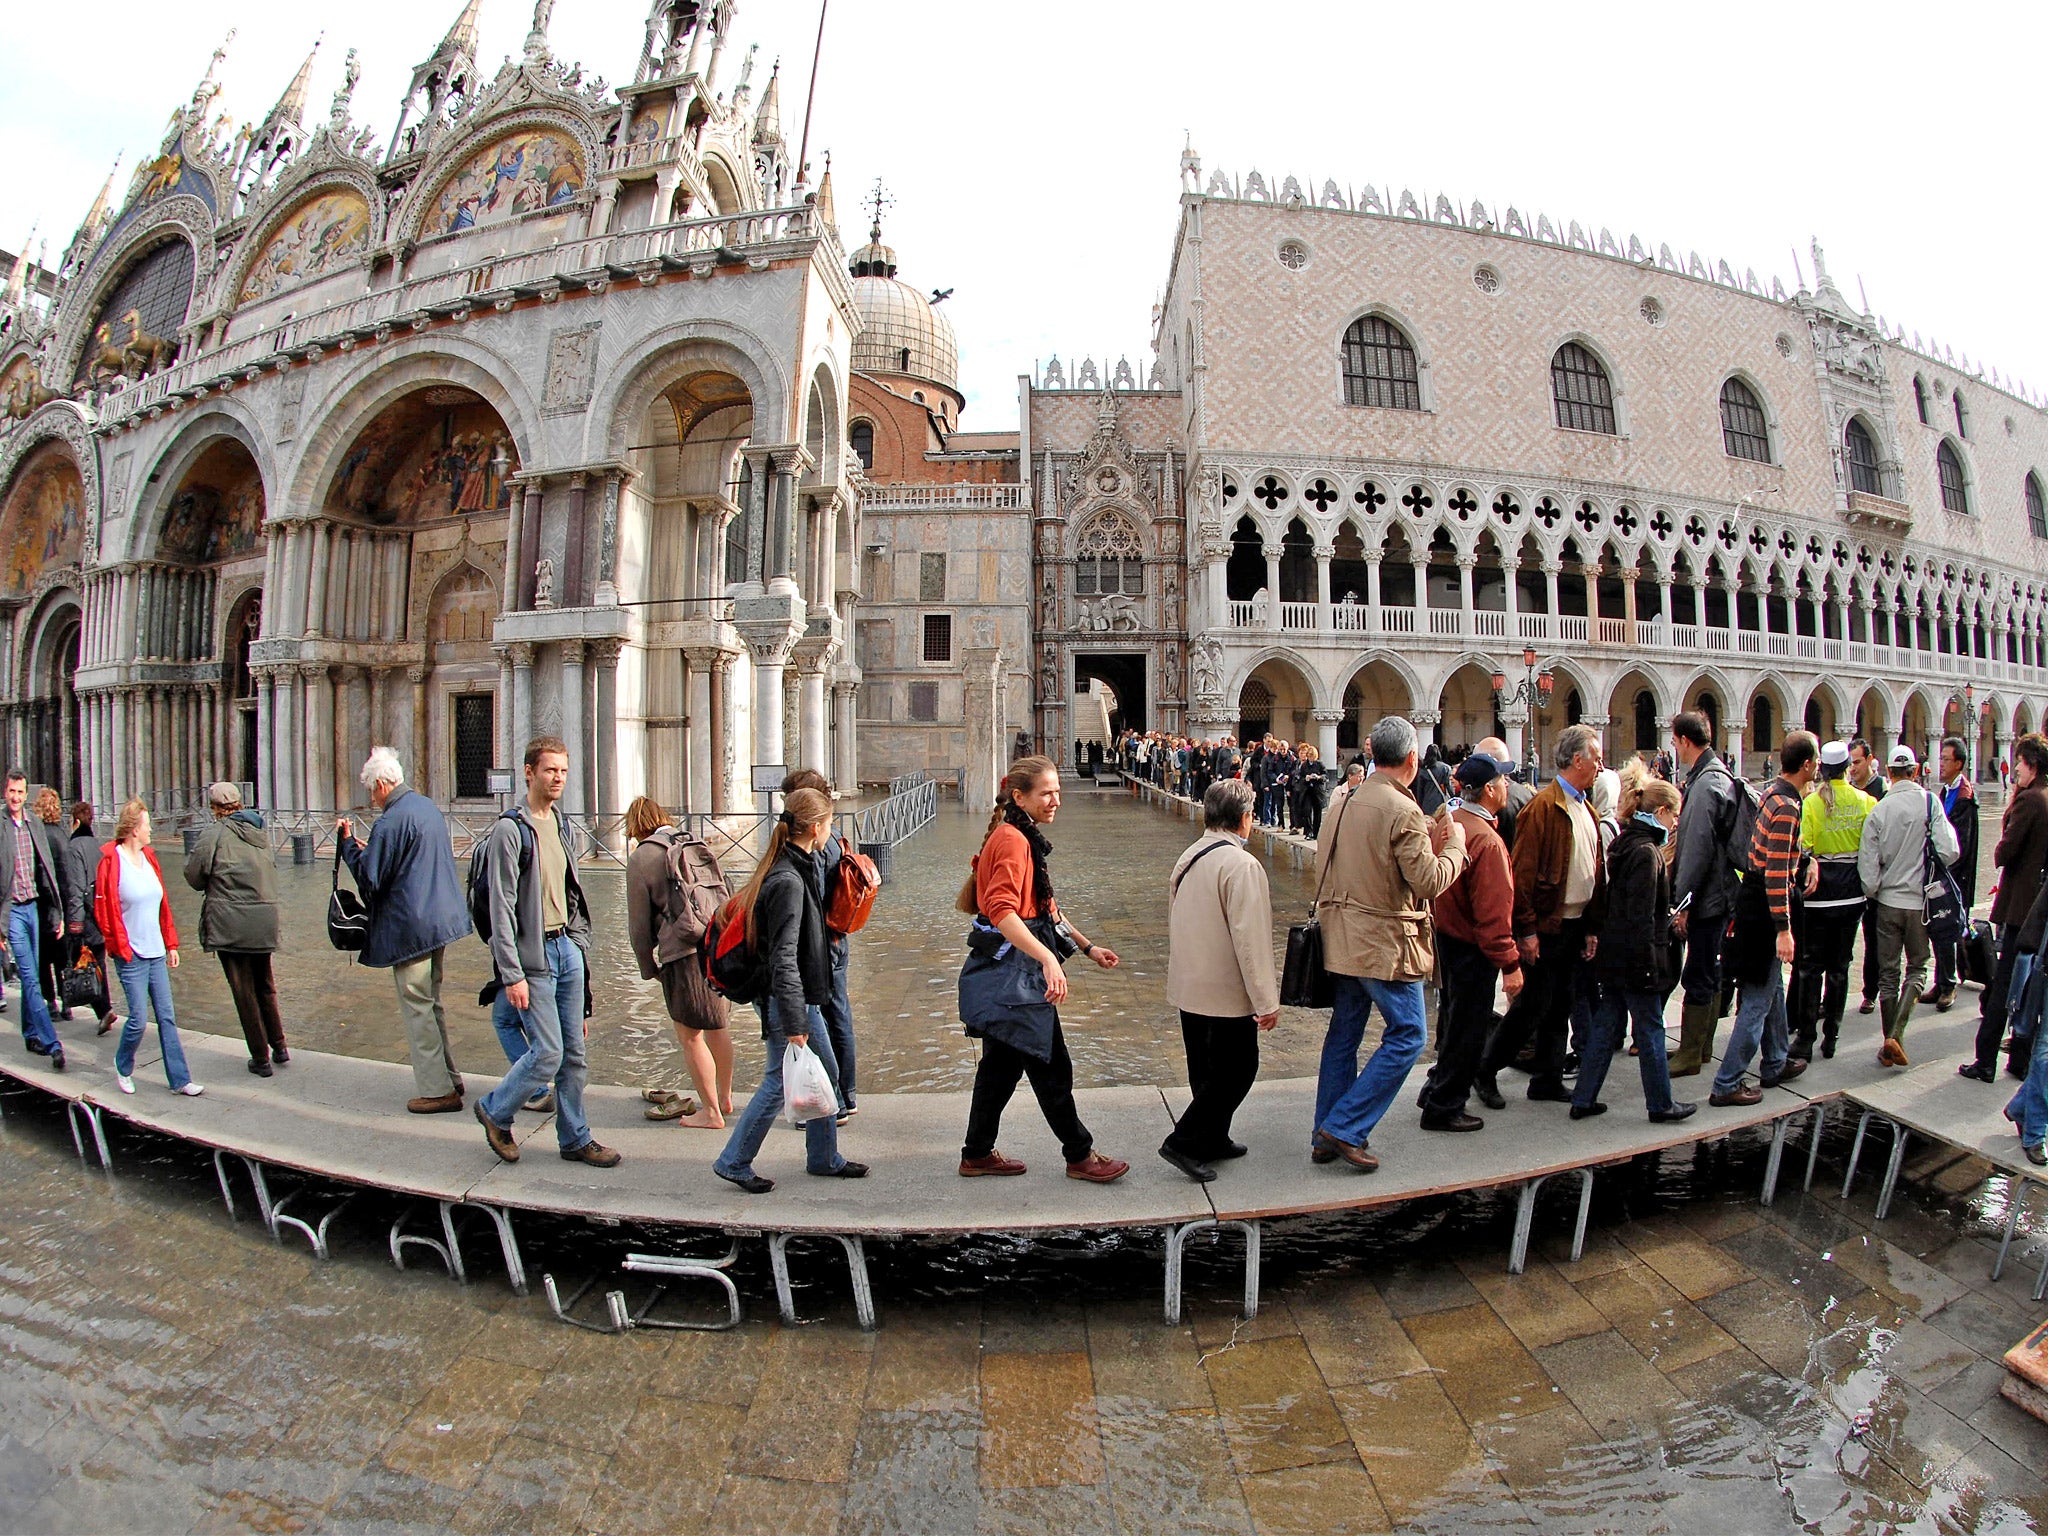 The Moses flood barrier is designed to prevent the sort of flooding that affected St Mark’s Square in October 2008